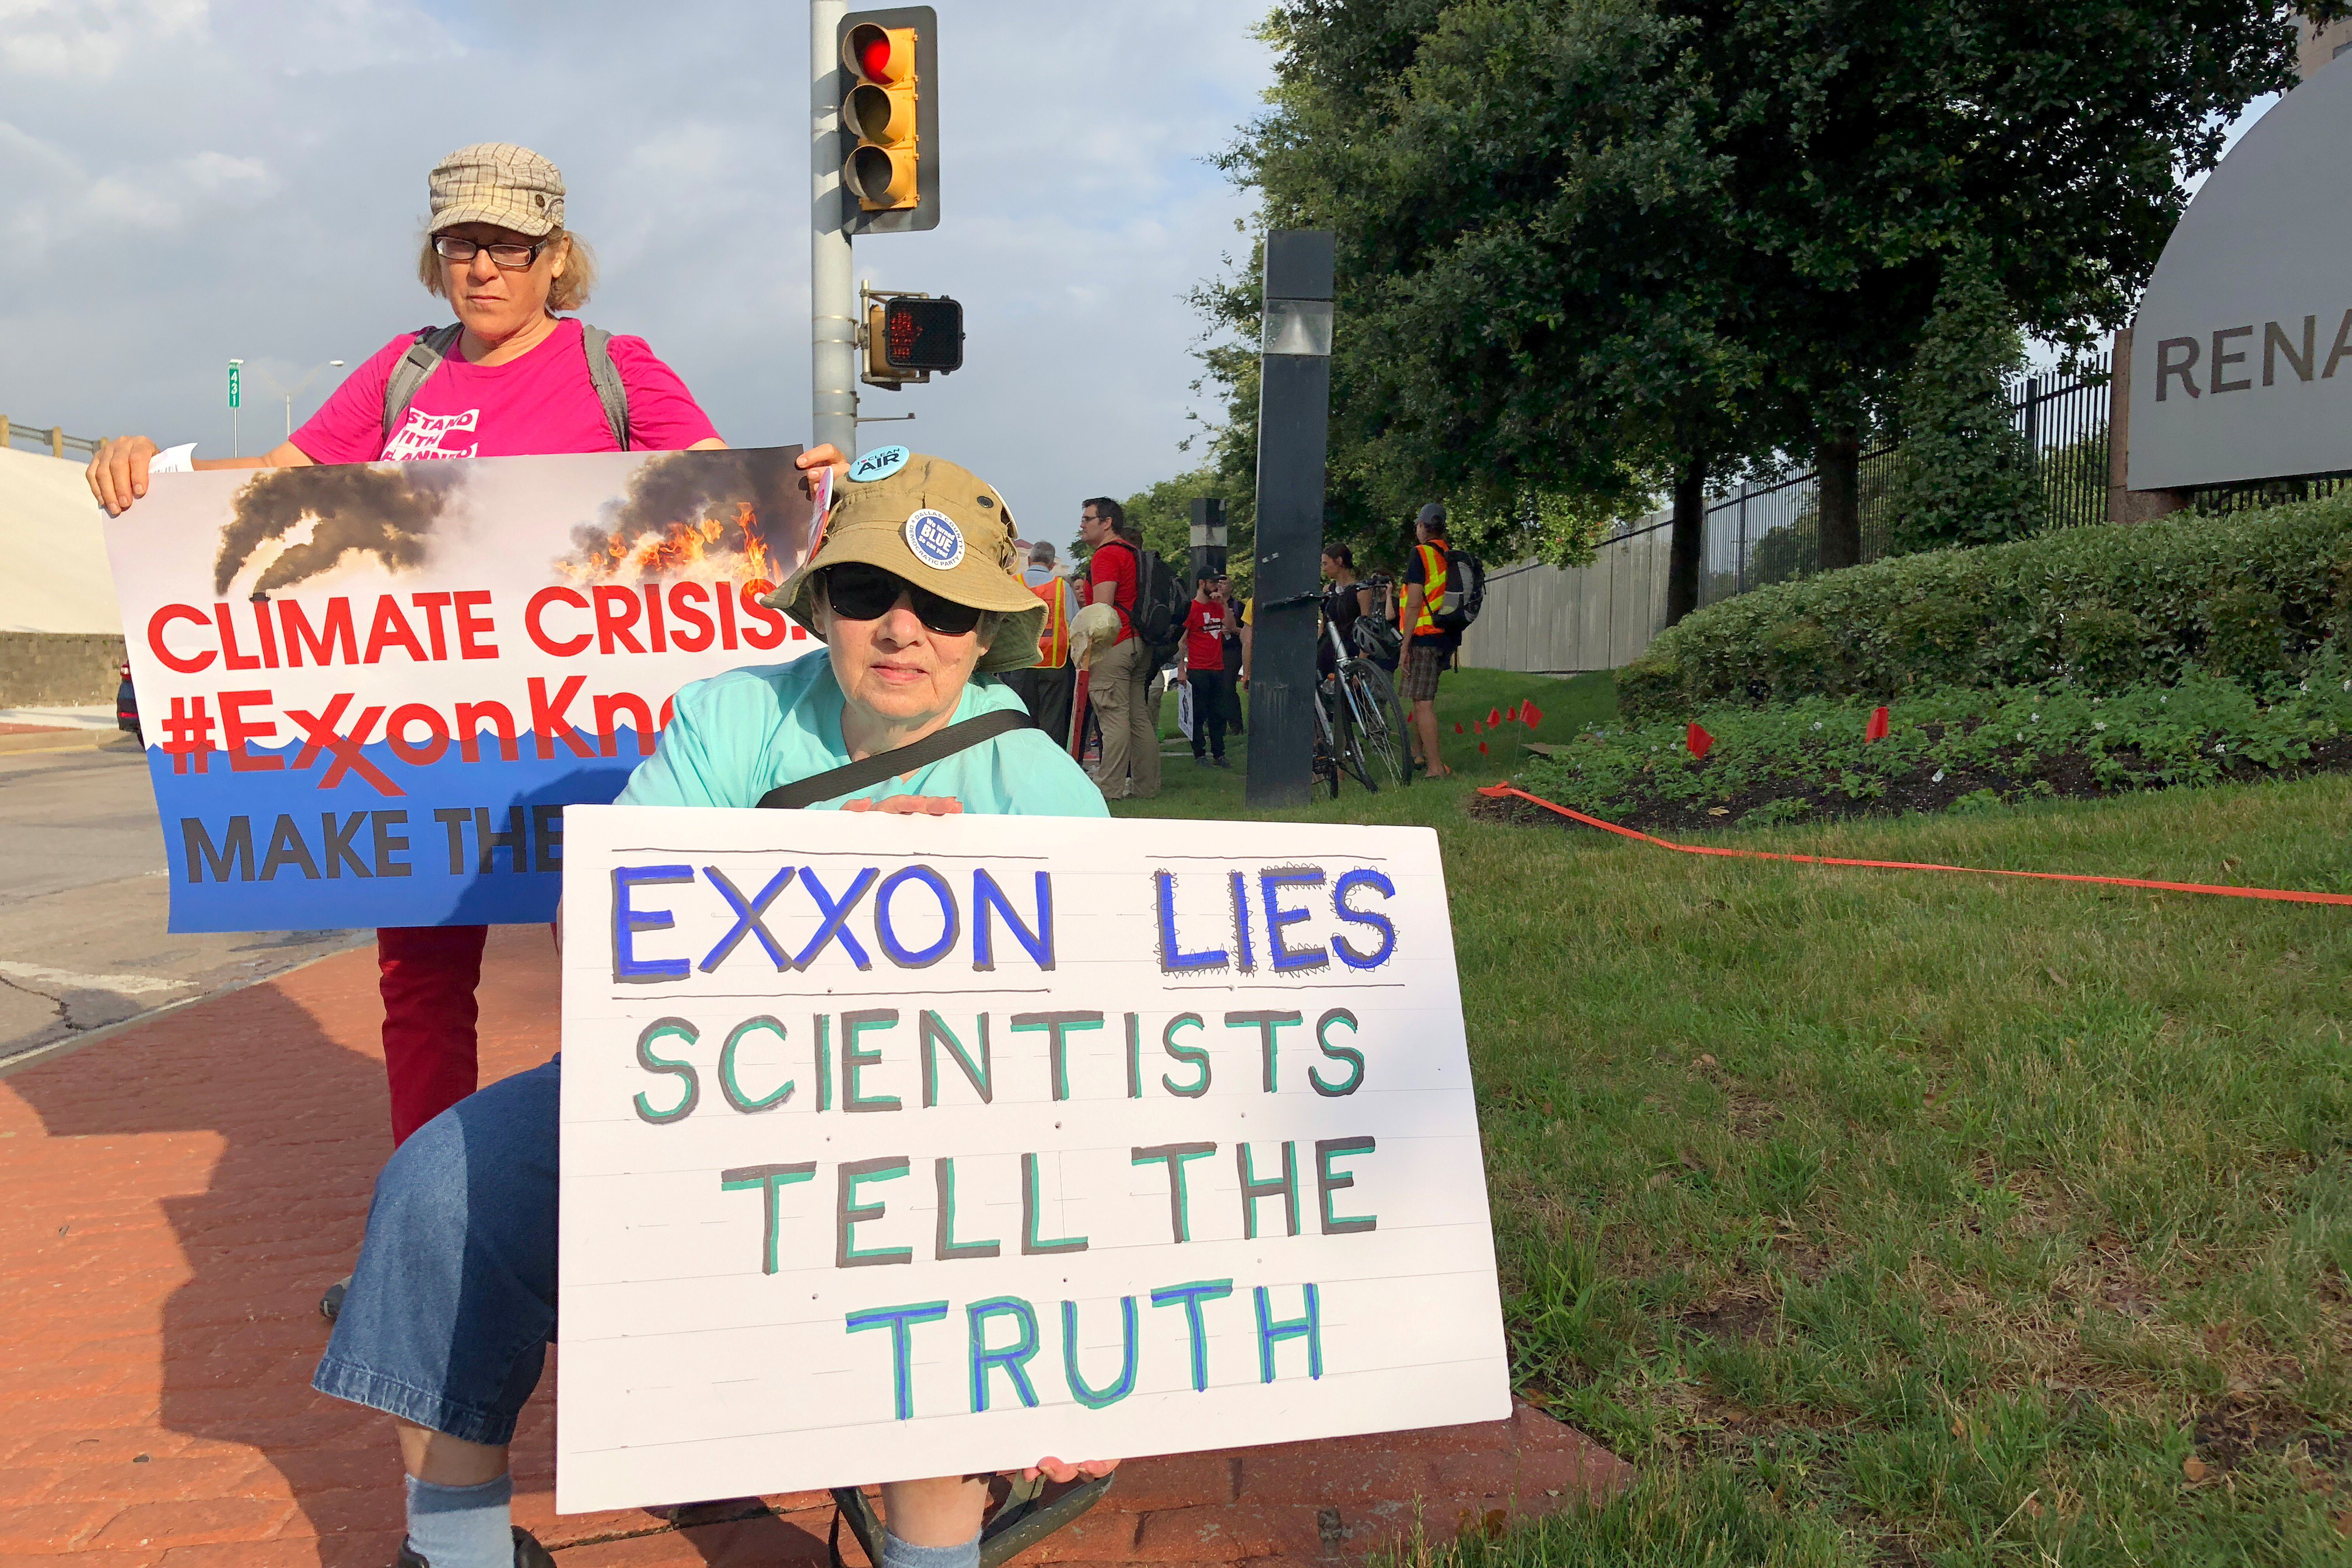 Blanca Gonzales and Susan Cooper protest ExxonMobil's climate change policies as people arrive at the 2019 annual shareholders meeting in Dallas